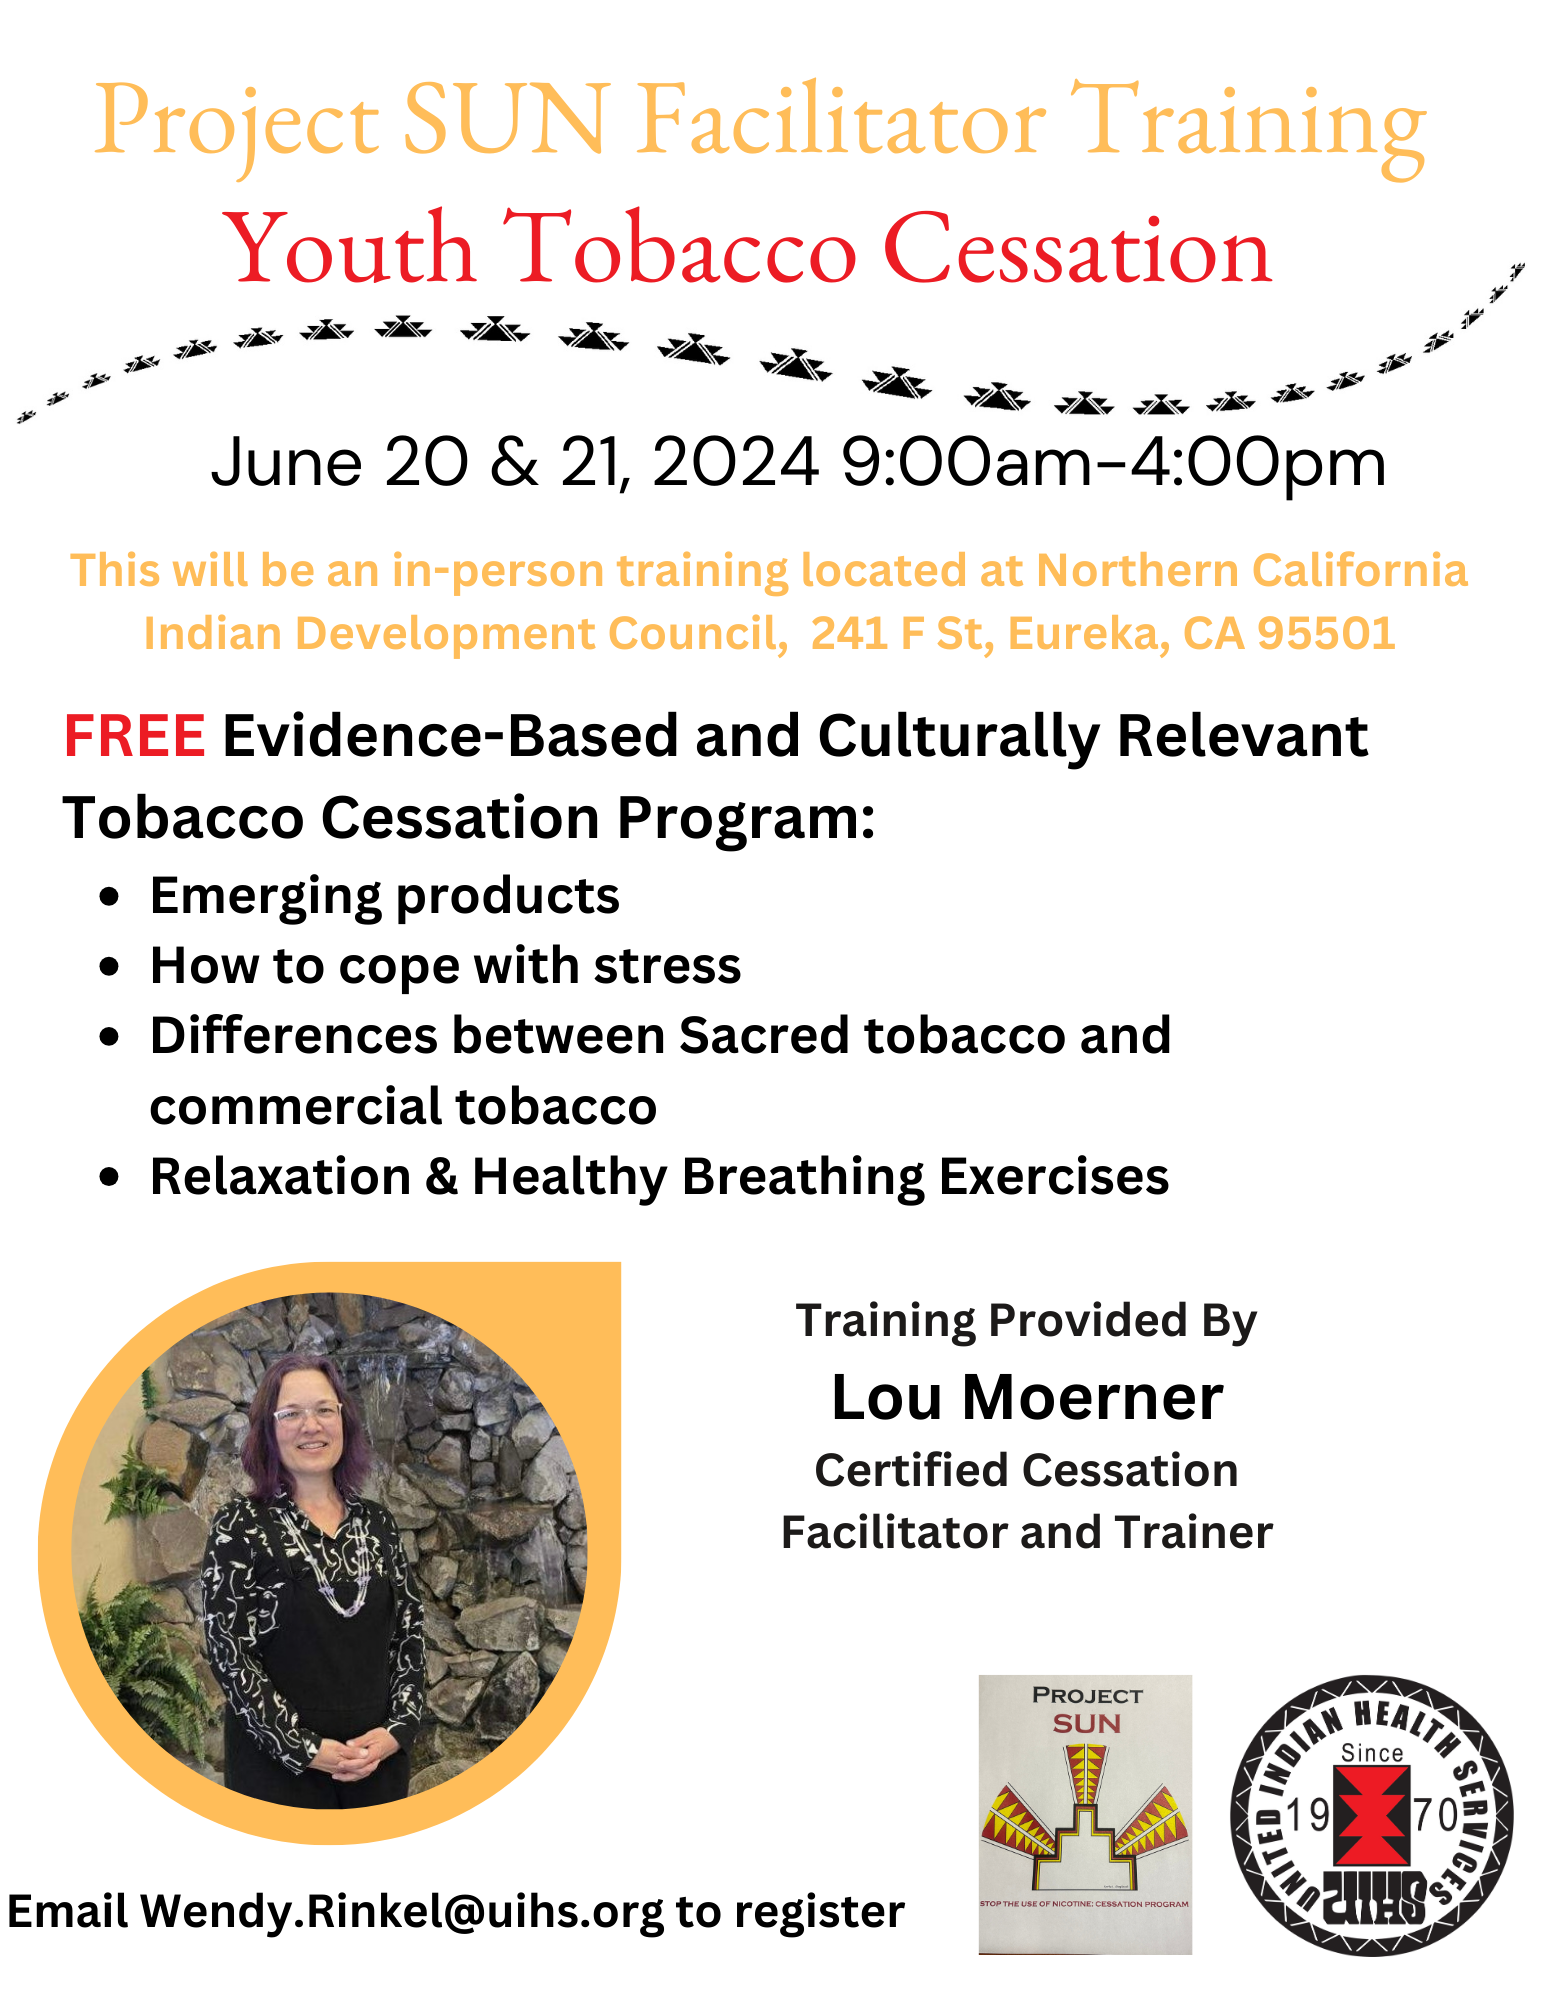 Project SUN Facilitator Training: Youth Tobacco Cessation. June 20 & 21, 2024 9:00am - 4:00pm. This will be an in-person training located at Northern California Indian Development Council, 241 F St, Eureka, CA 95501. FREE Evidence-Based and Culturally Relevant Tobacco Cessation Program: Emerging products, How to cope with stress, Differences between Sacred tobacco and commercial tovacco, Relaxation & Healthy Breathing Exercises. Photo of a woman in a black dress. Training Provided By Lou Moerner, Certified Cessation Facilitator and Trainer. Email Wendy.Rinkel@uihs.org to register. Logos of Project SUN and United Indian Health Services Since 1970.